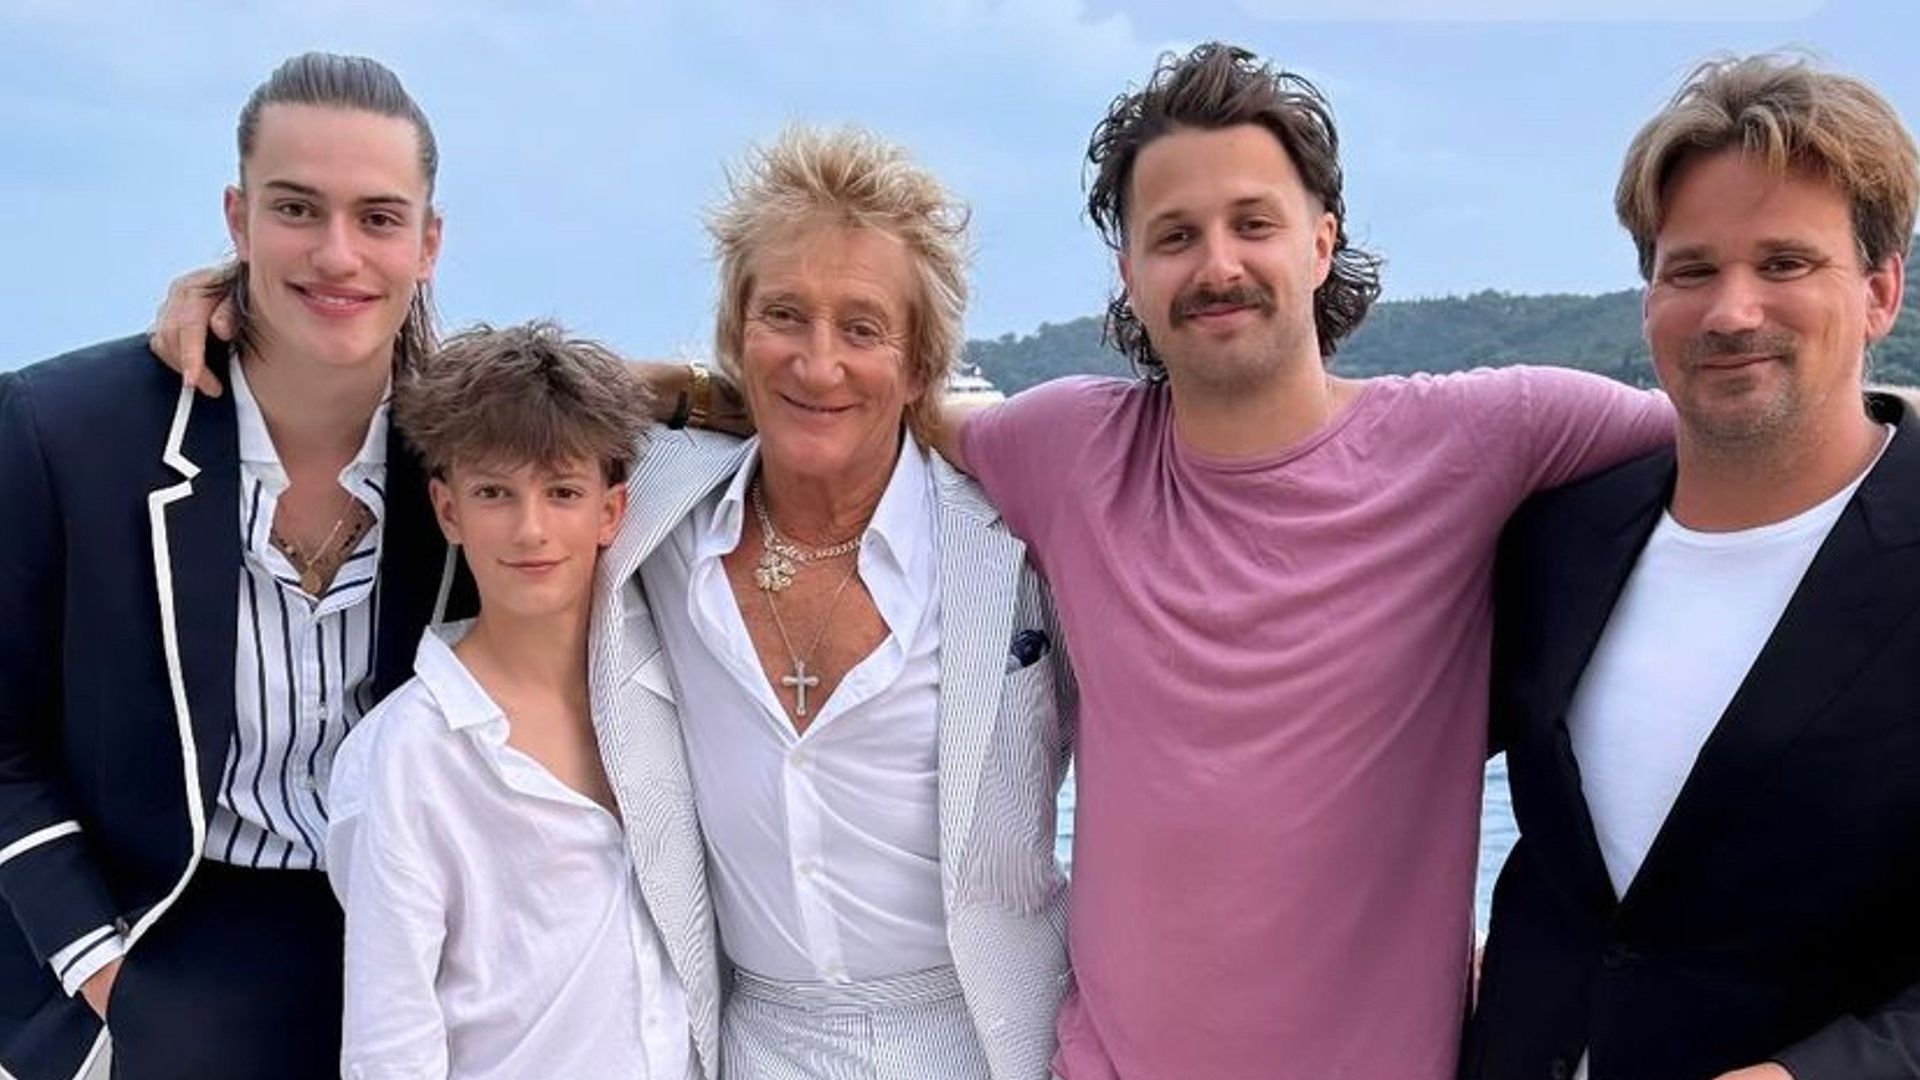 Rod Stewart surrounded by lookalike sons and gorgeous dancer daughter for special reason